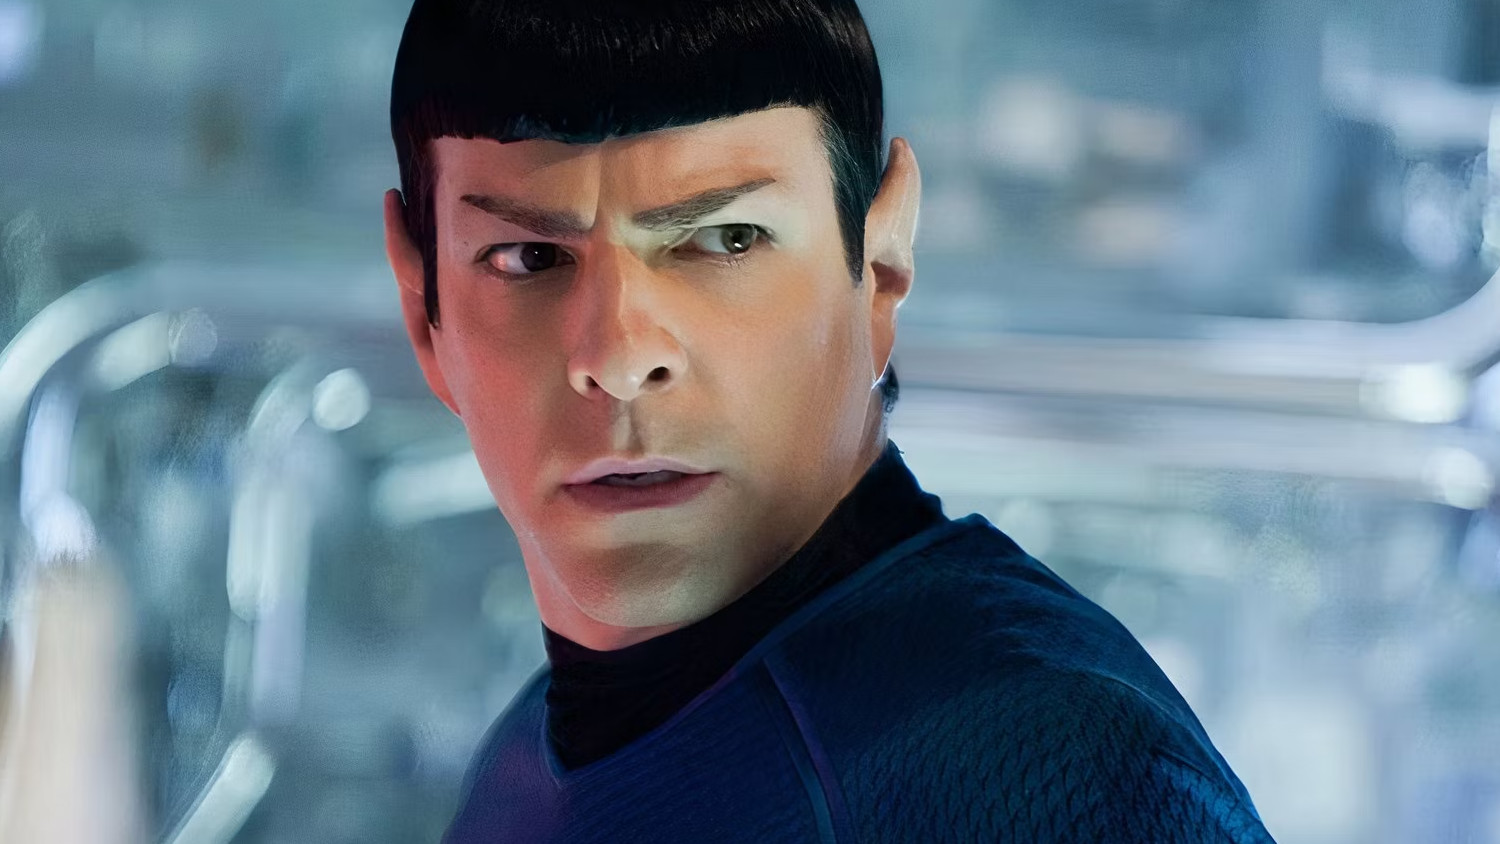 Star Trek’s Zachary Quinto Blasted By Restaurant For Being A ‘Terrible Customer’